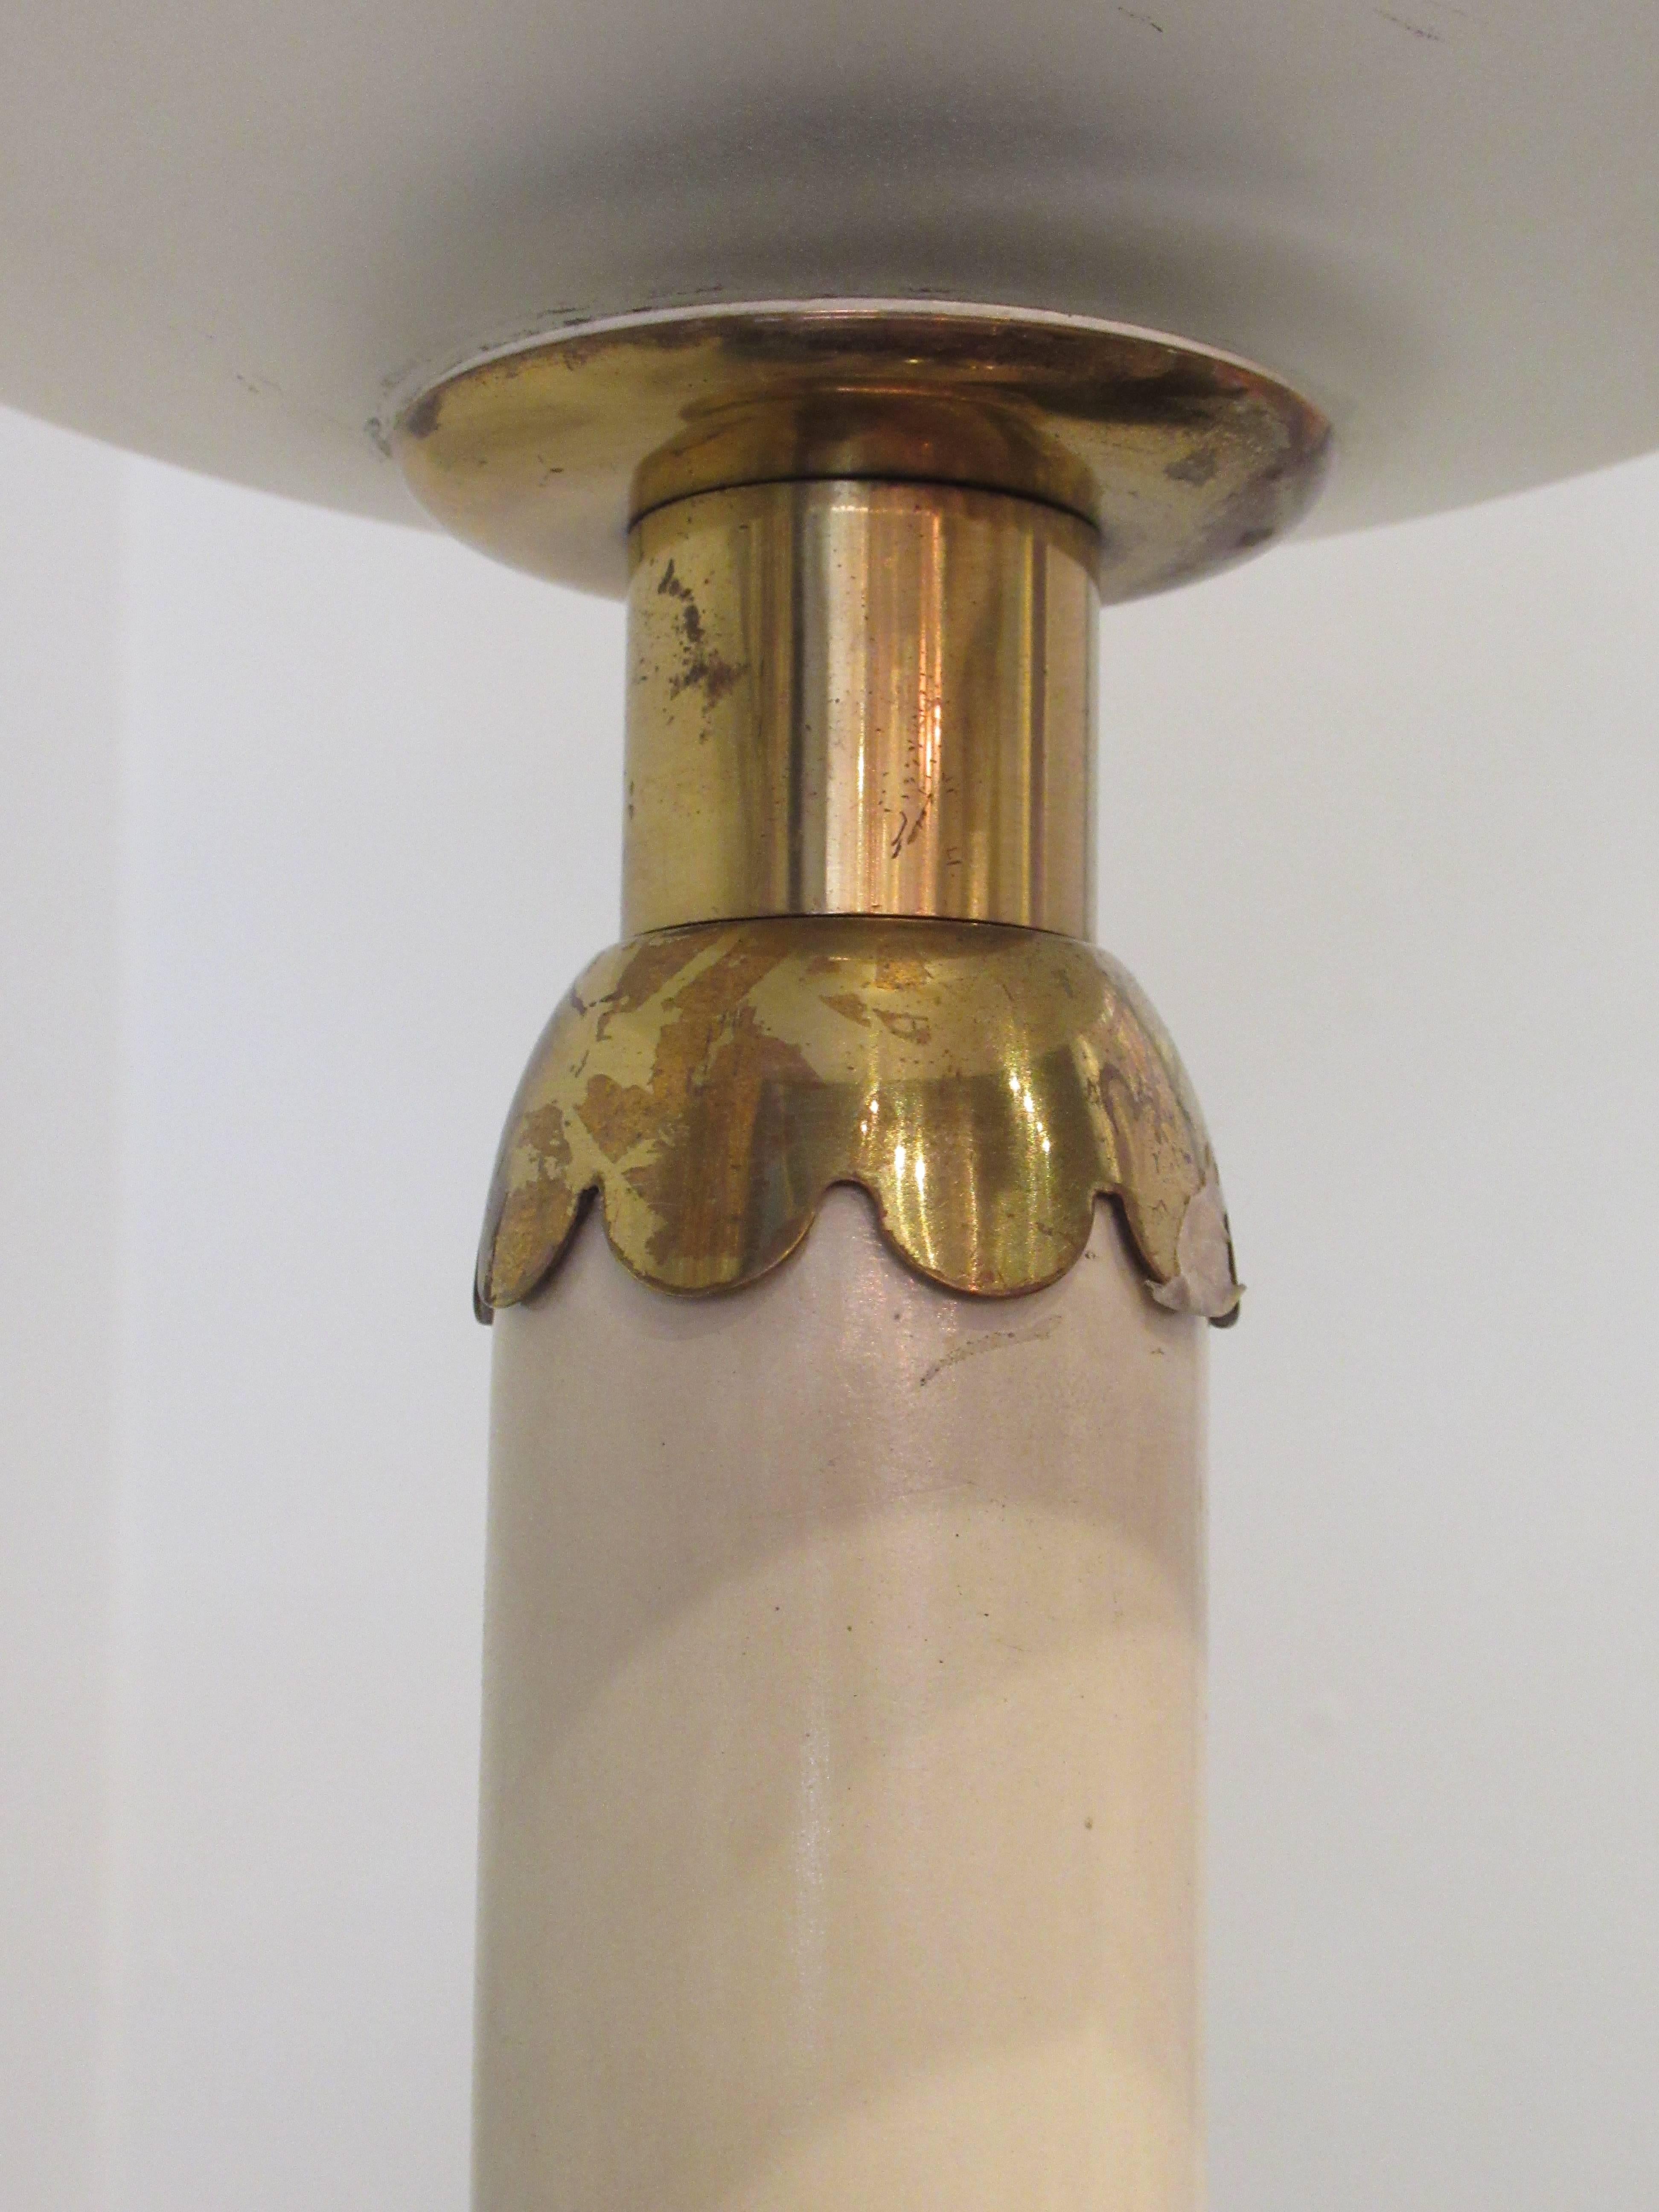 Fine Italian Modern Parchment, Brass and Glass Floor Lamp, Sabino, 1950s For Sale 1